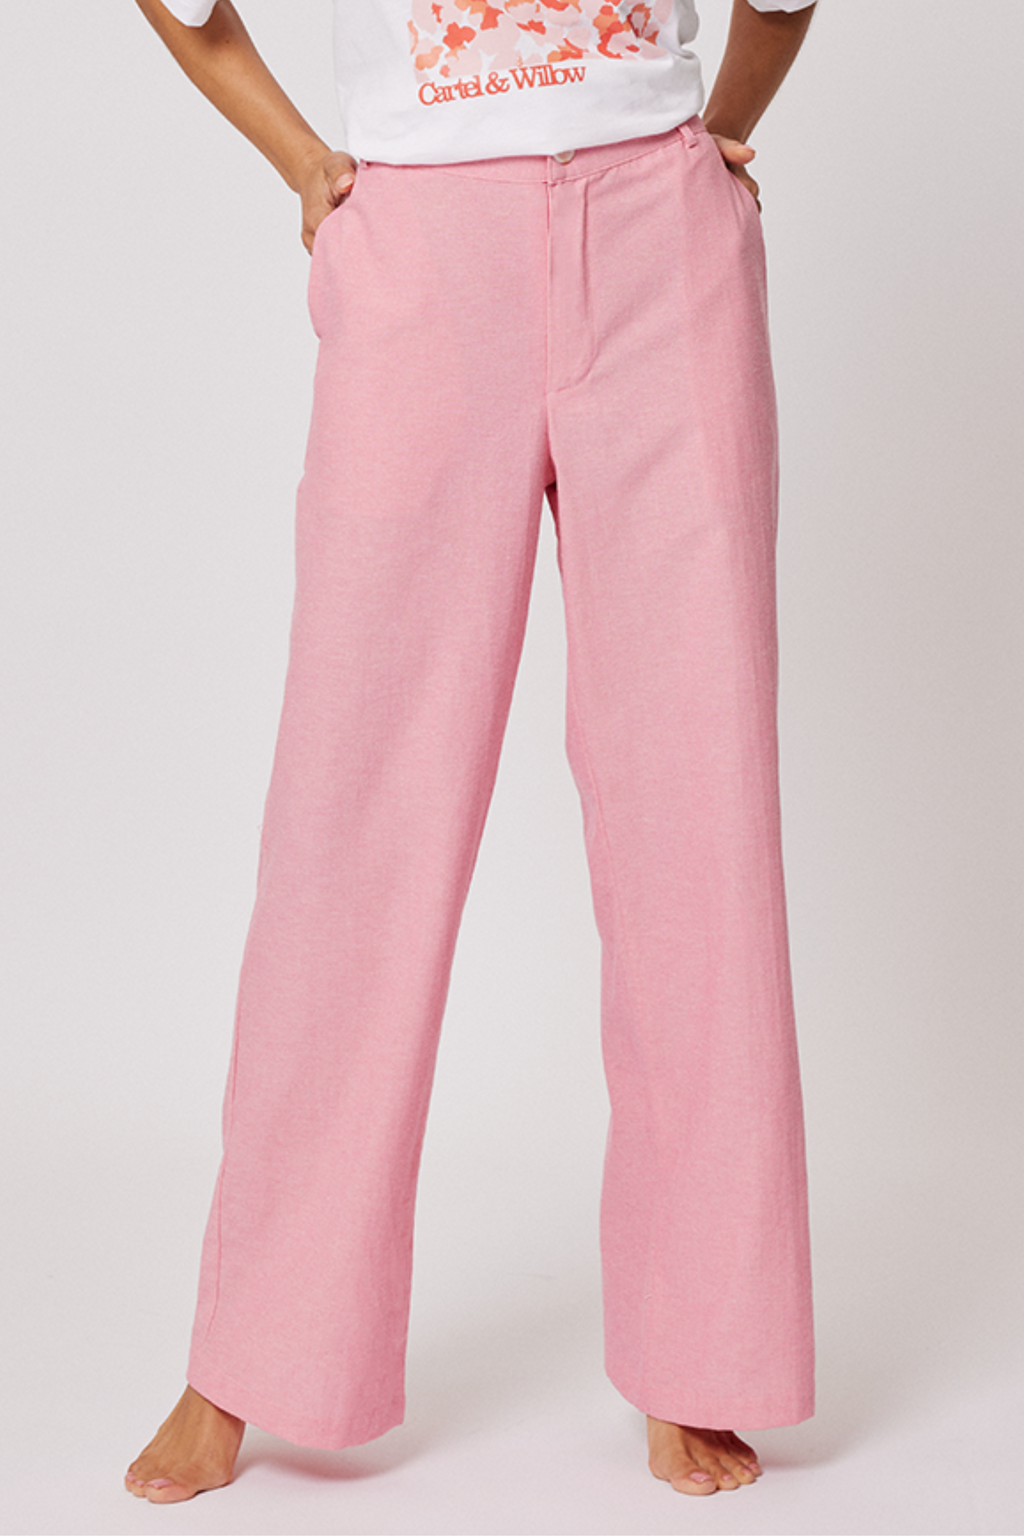 LUCY TROUSER - Taffy Chambray